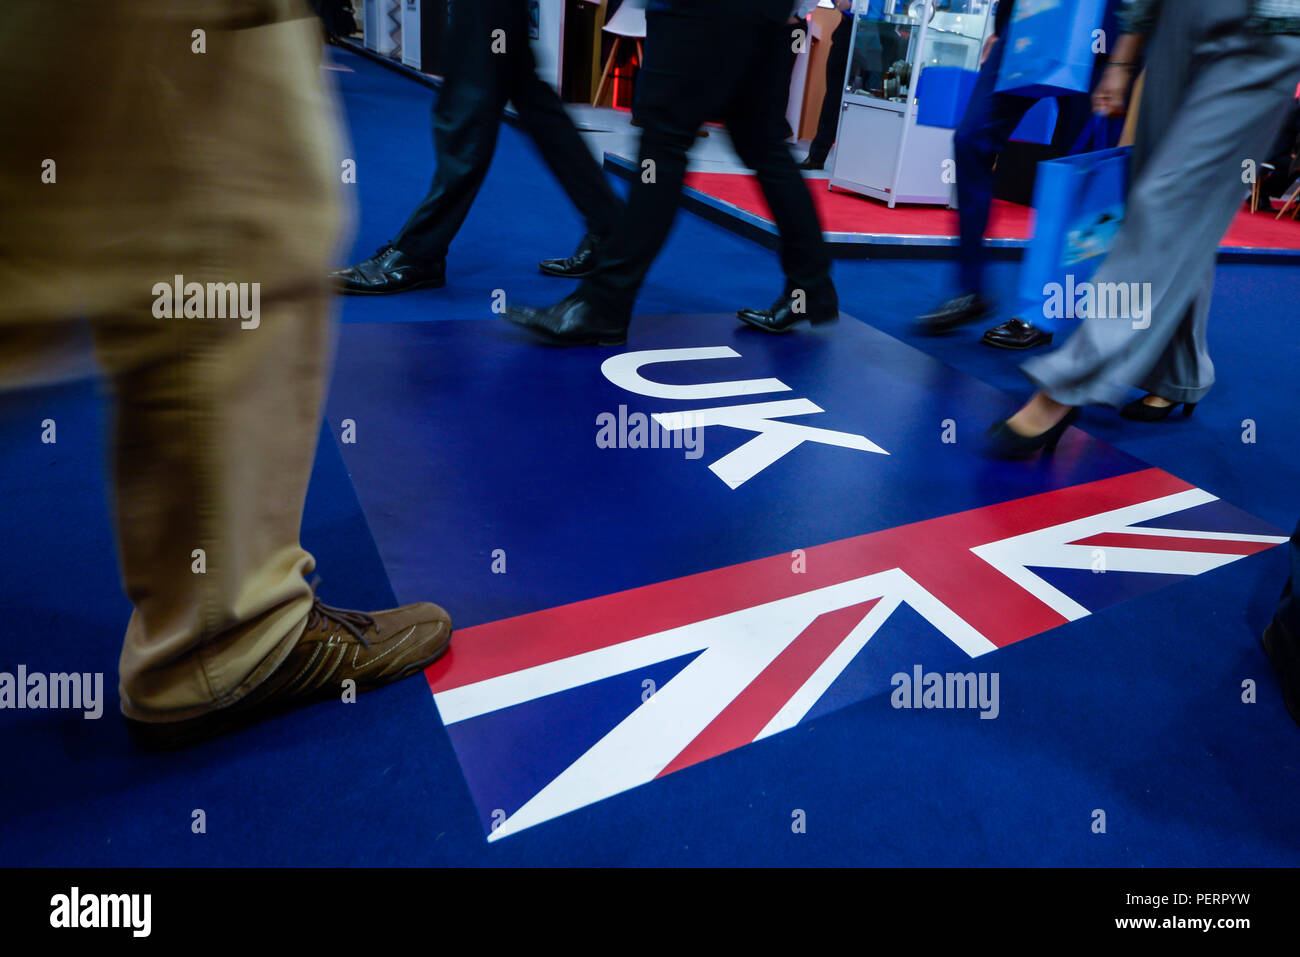 Walking over the UK. United Kingdom British Union Jack Flag on the floor being walked over in the display halls at Farnborough International Airshow Stock Photo